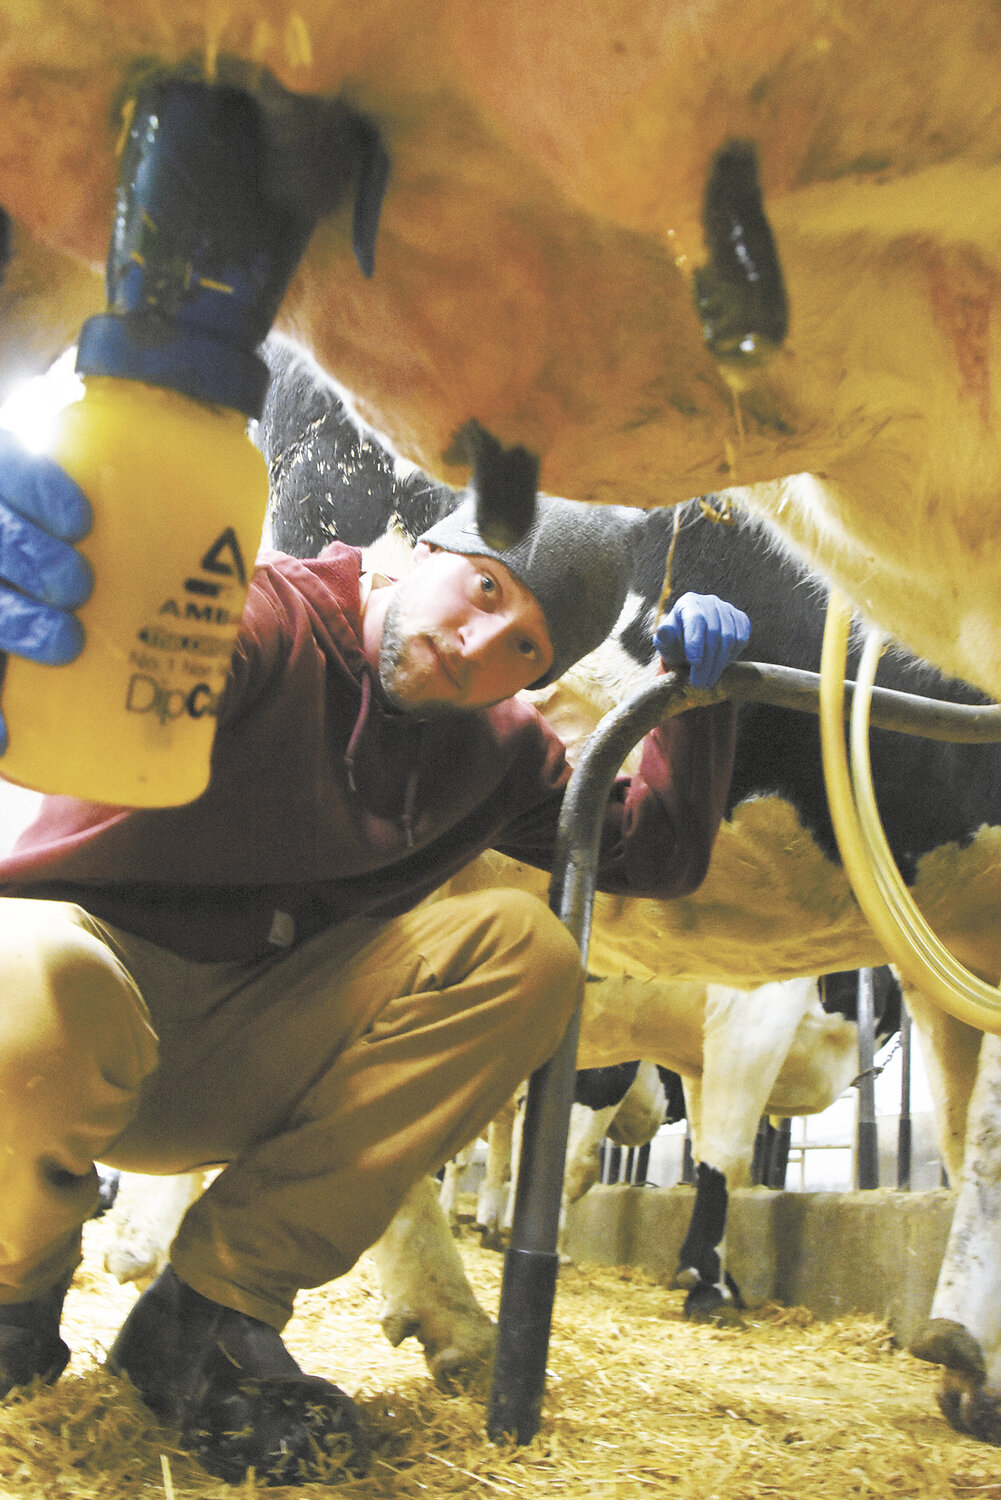 Sam Hopfer applies post dip during milking Jan. 23 on the farm he operates with his uncle  near Lake Henry, Minnesota. Hopfer joined the Lake Henry Fire Department in 2019.